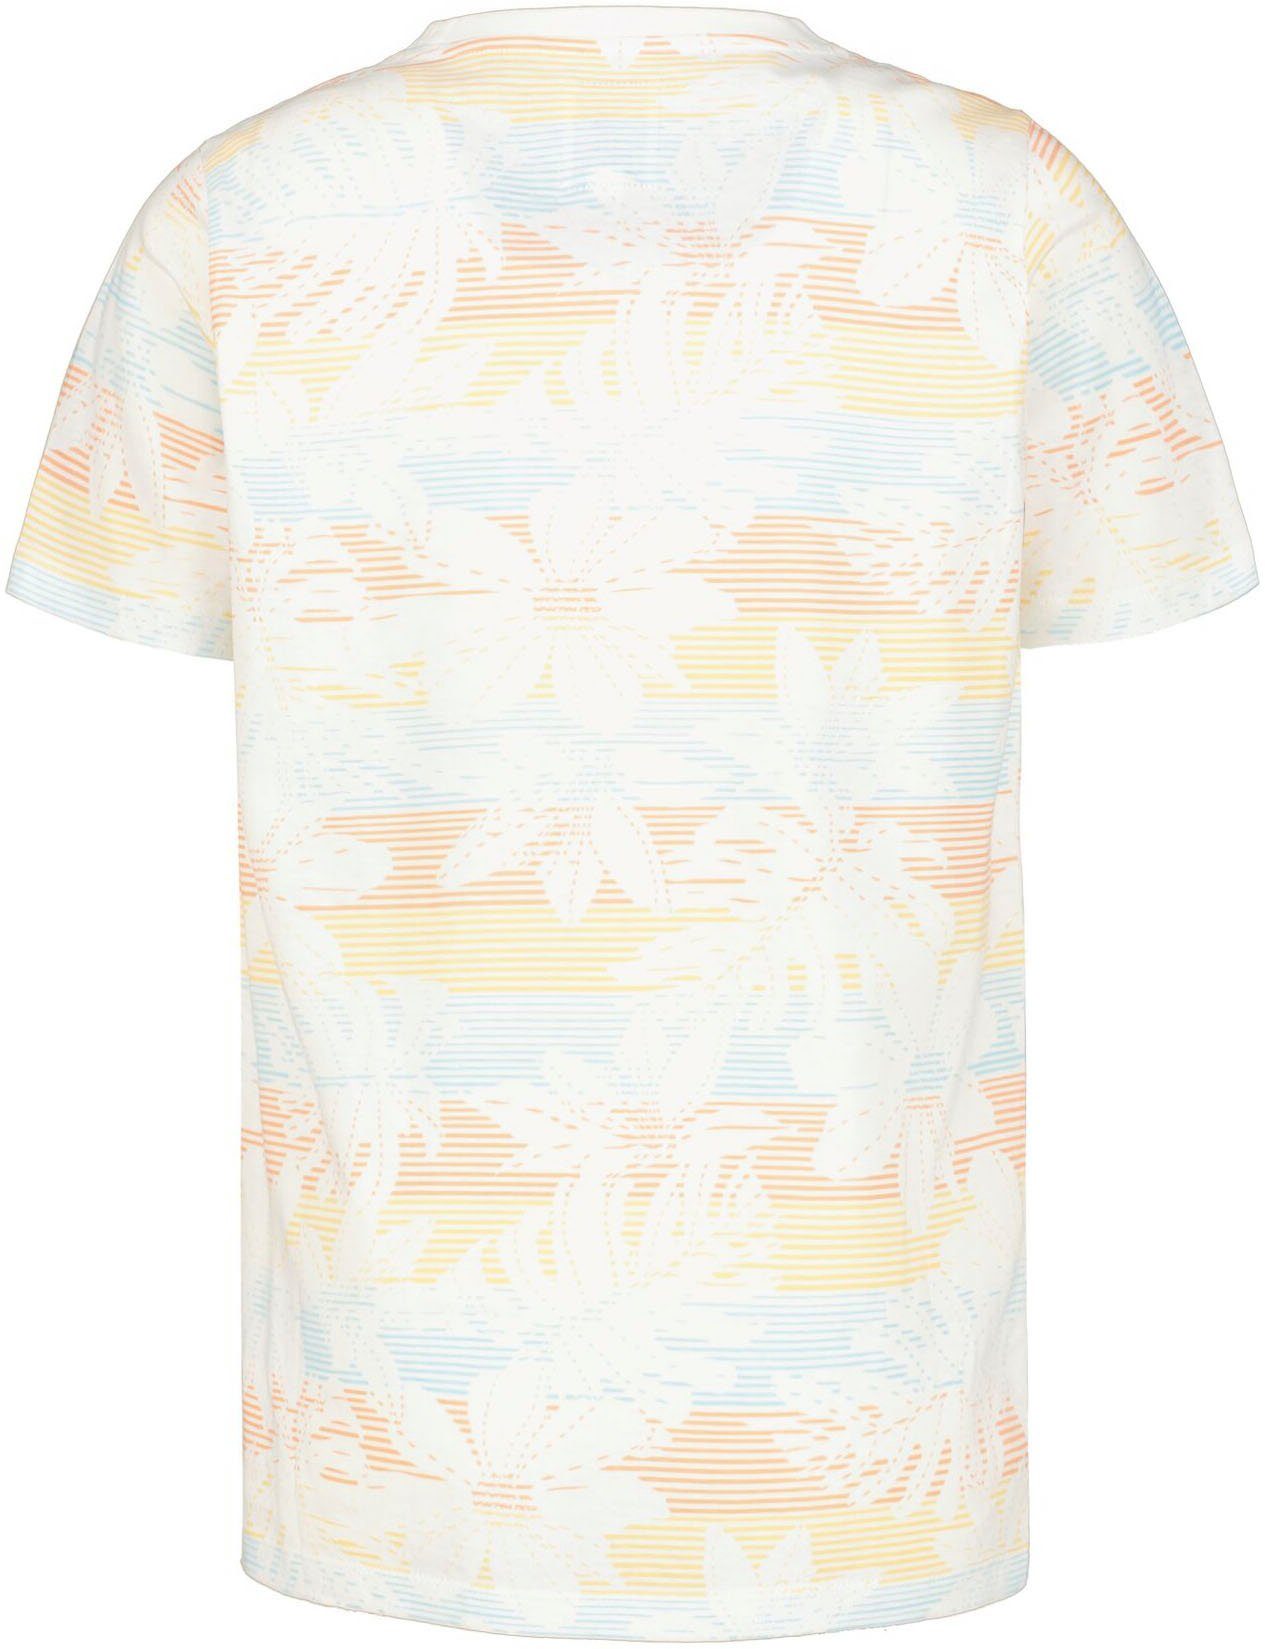 T-Shirt offwhite floralem BOYS for mit Garcia Allovermuster,